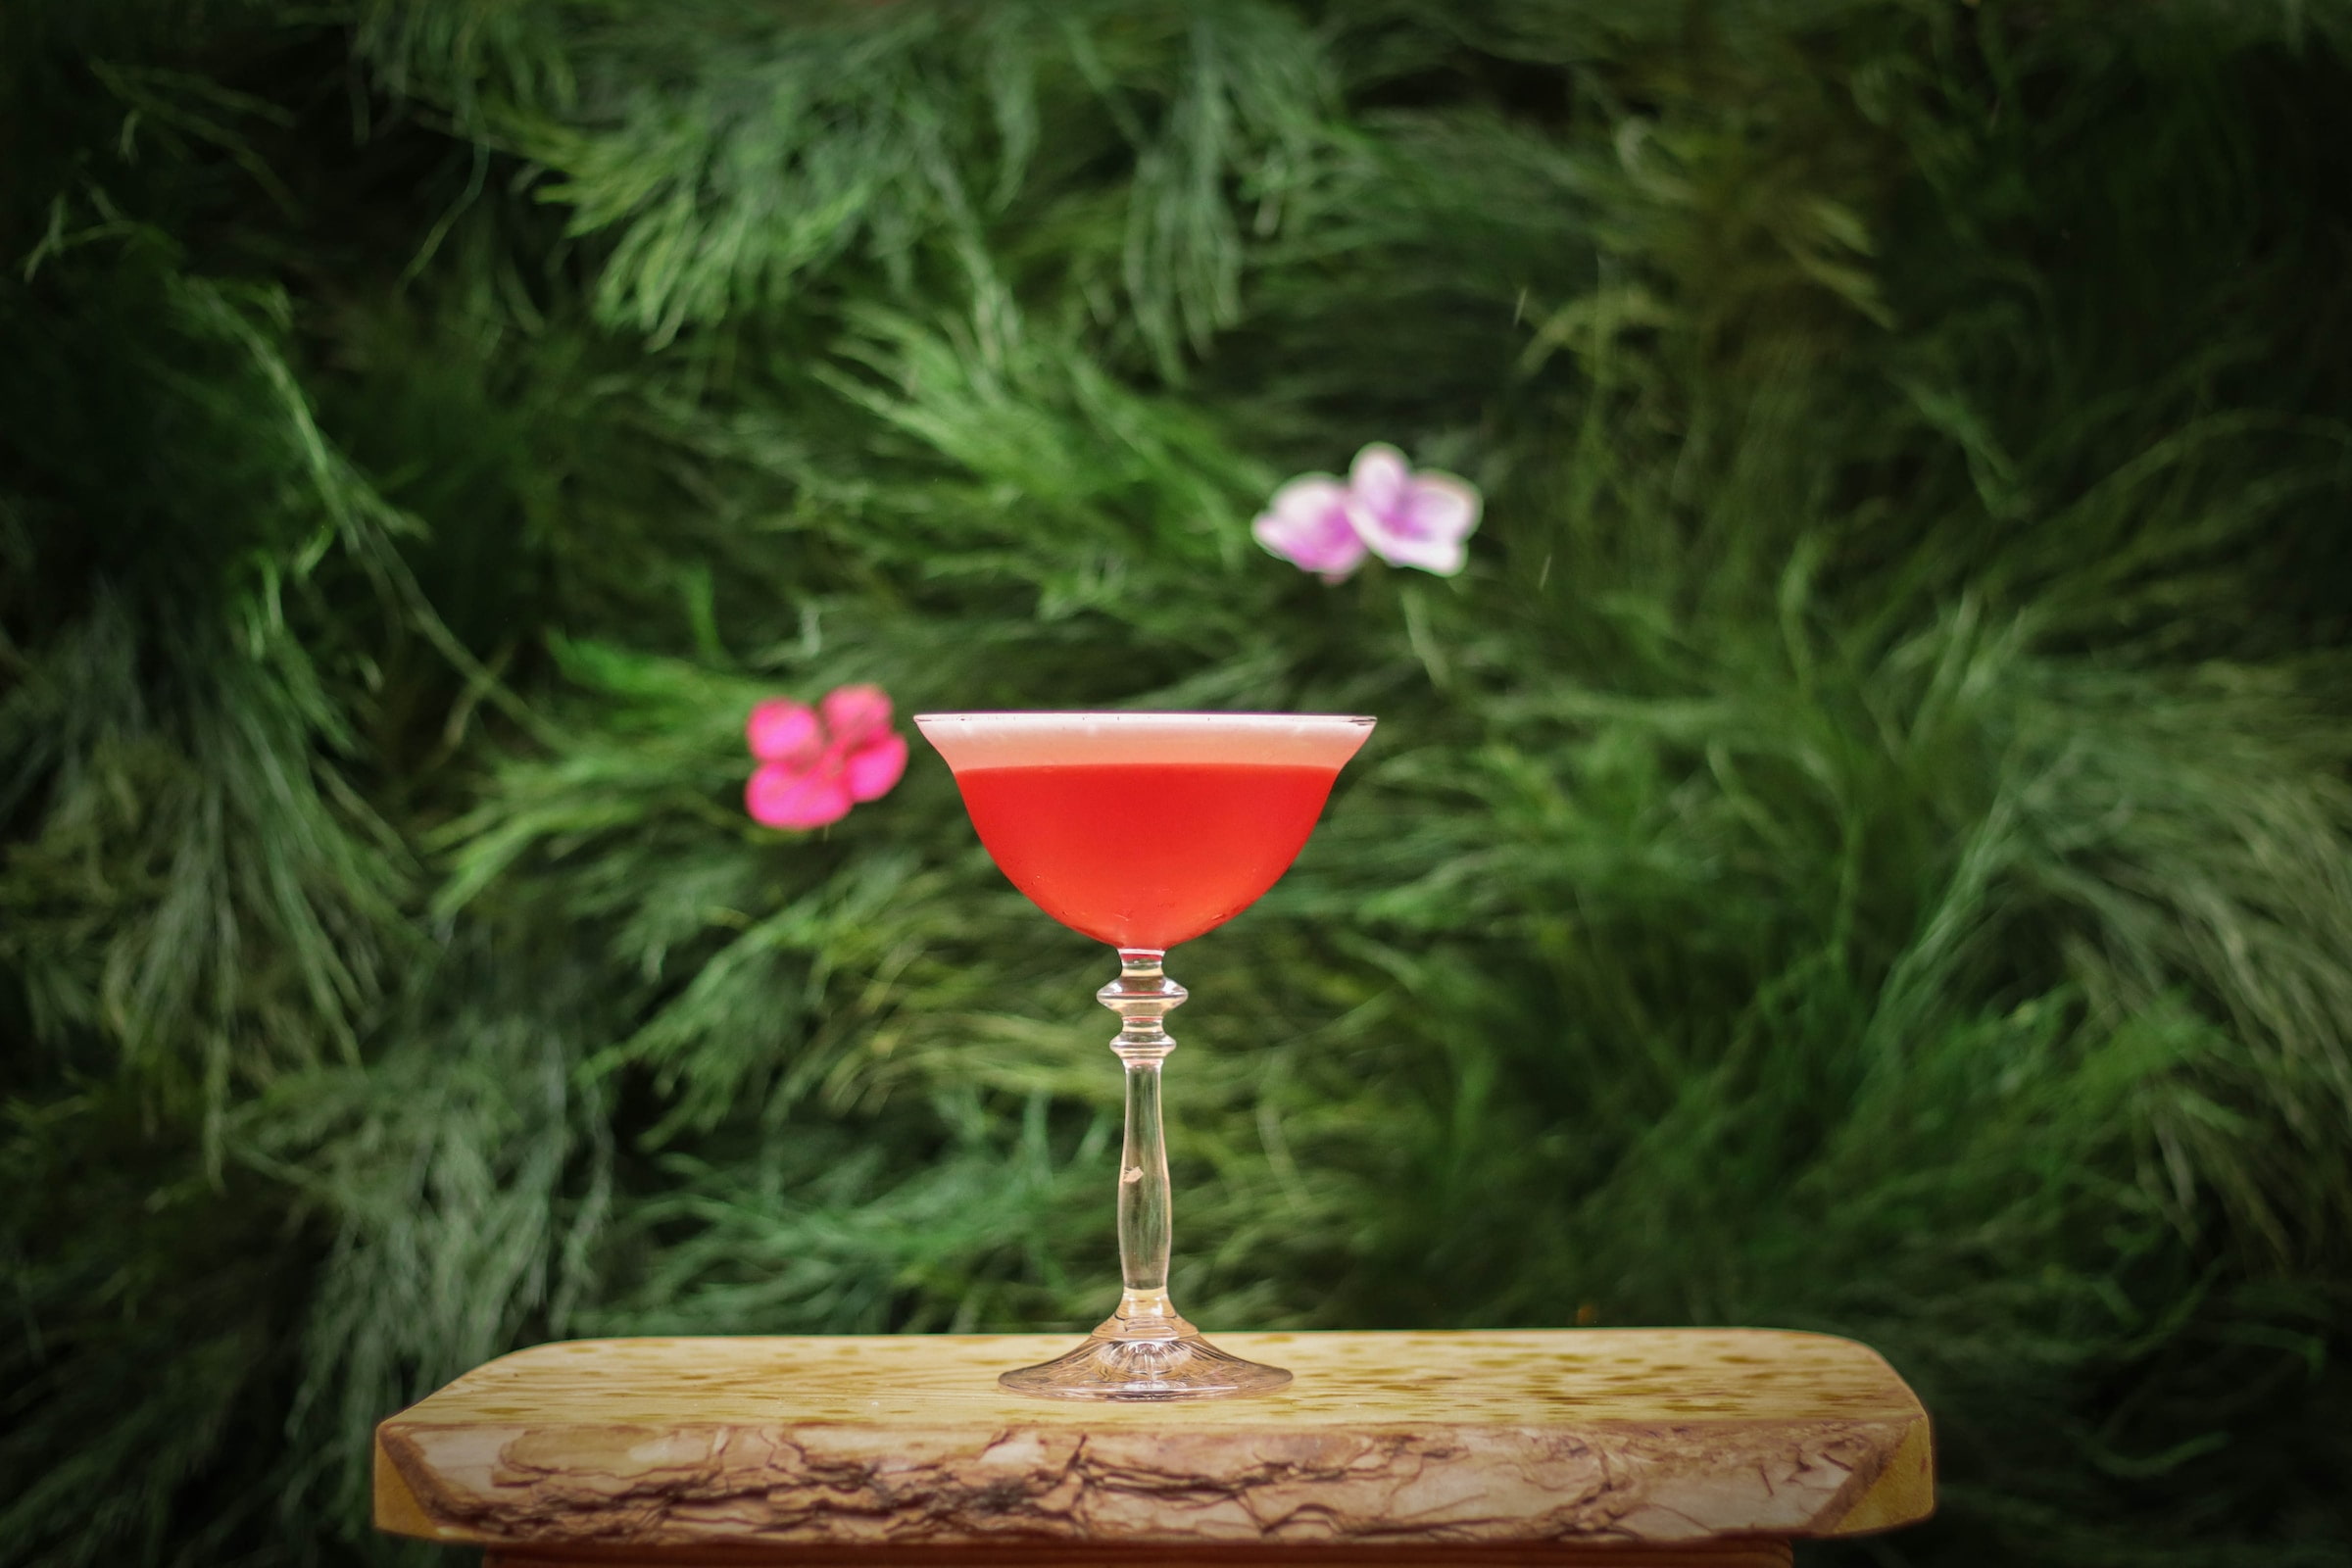 If you'd like to drink cocktails in the garden all summer, this is the event for you